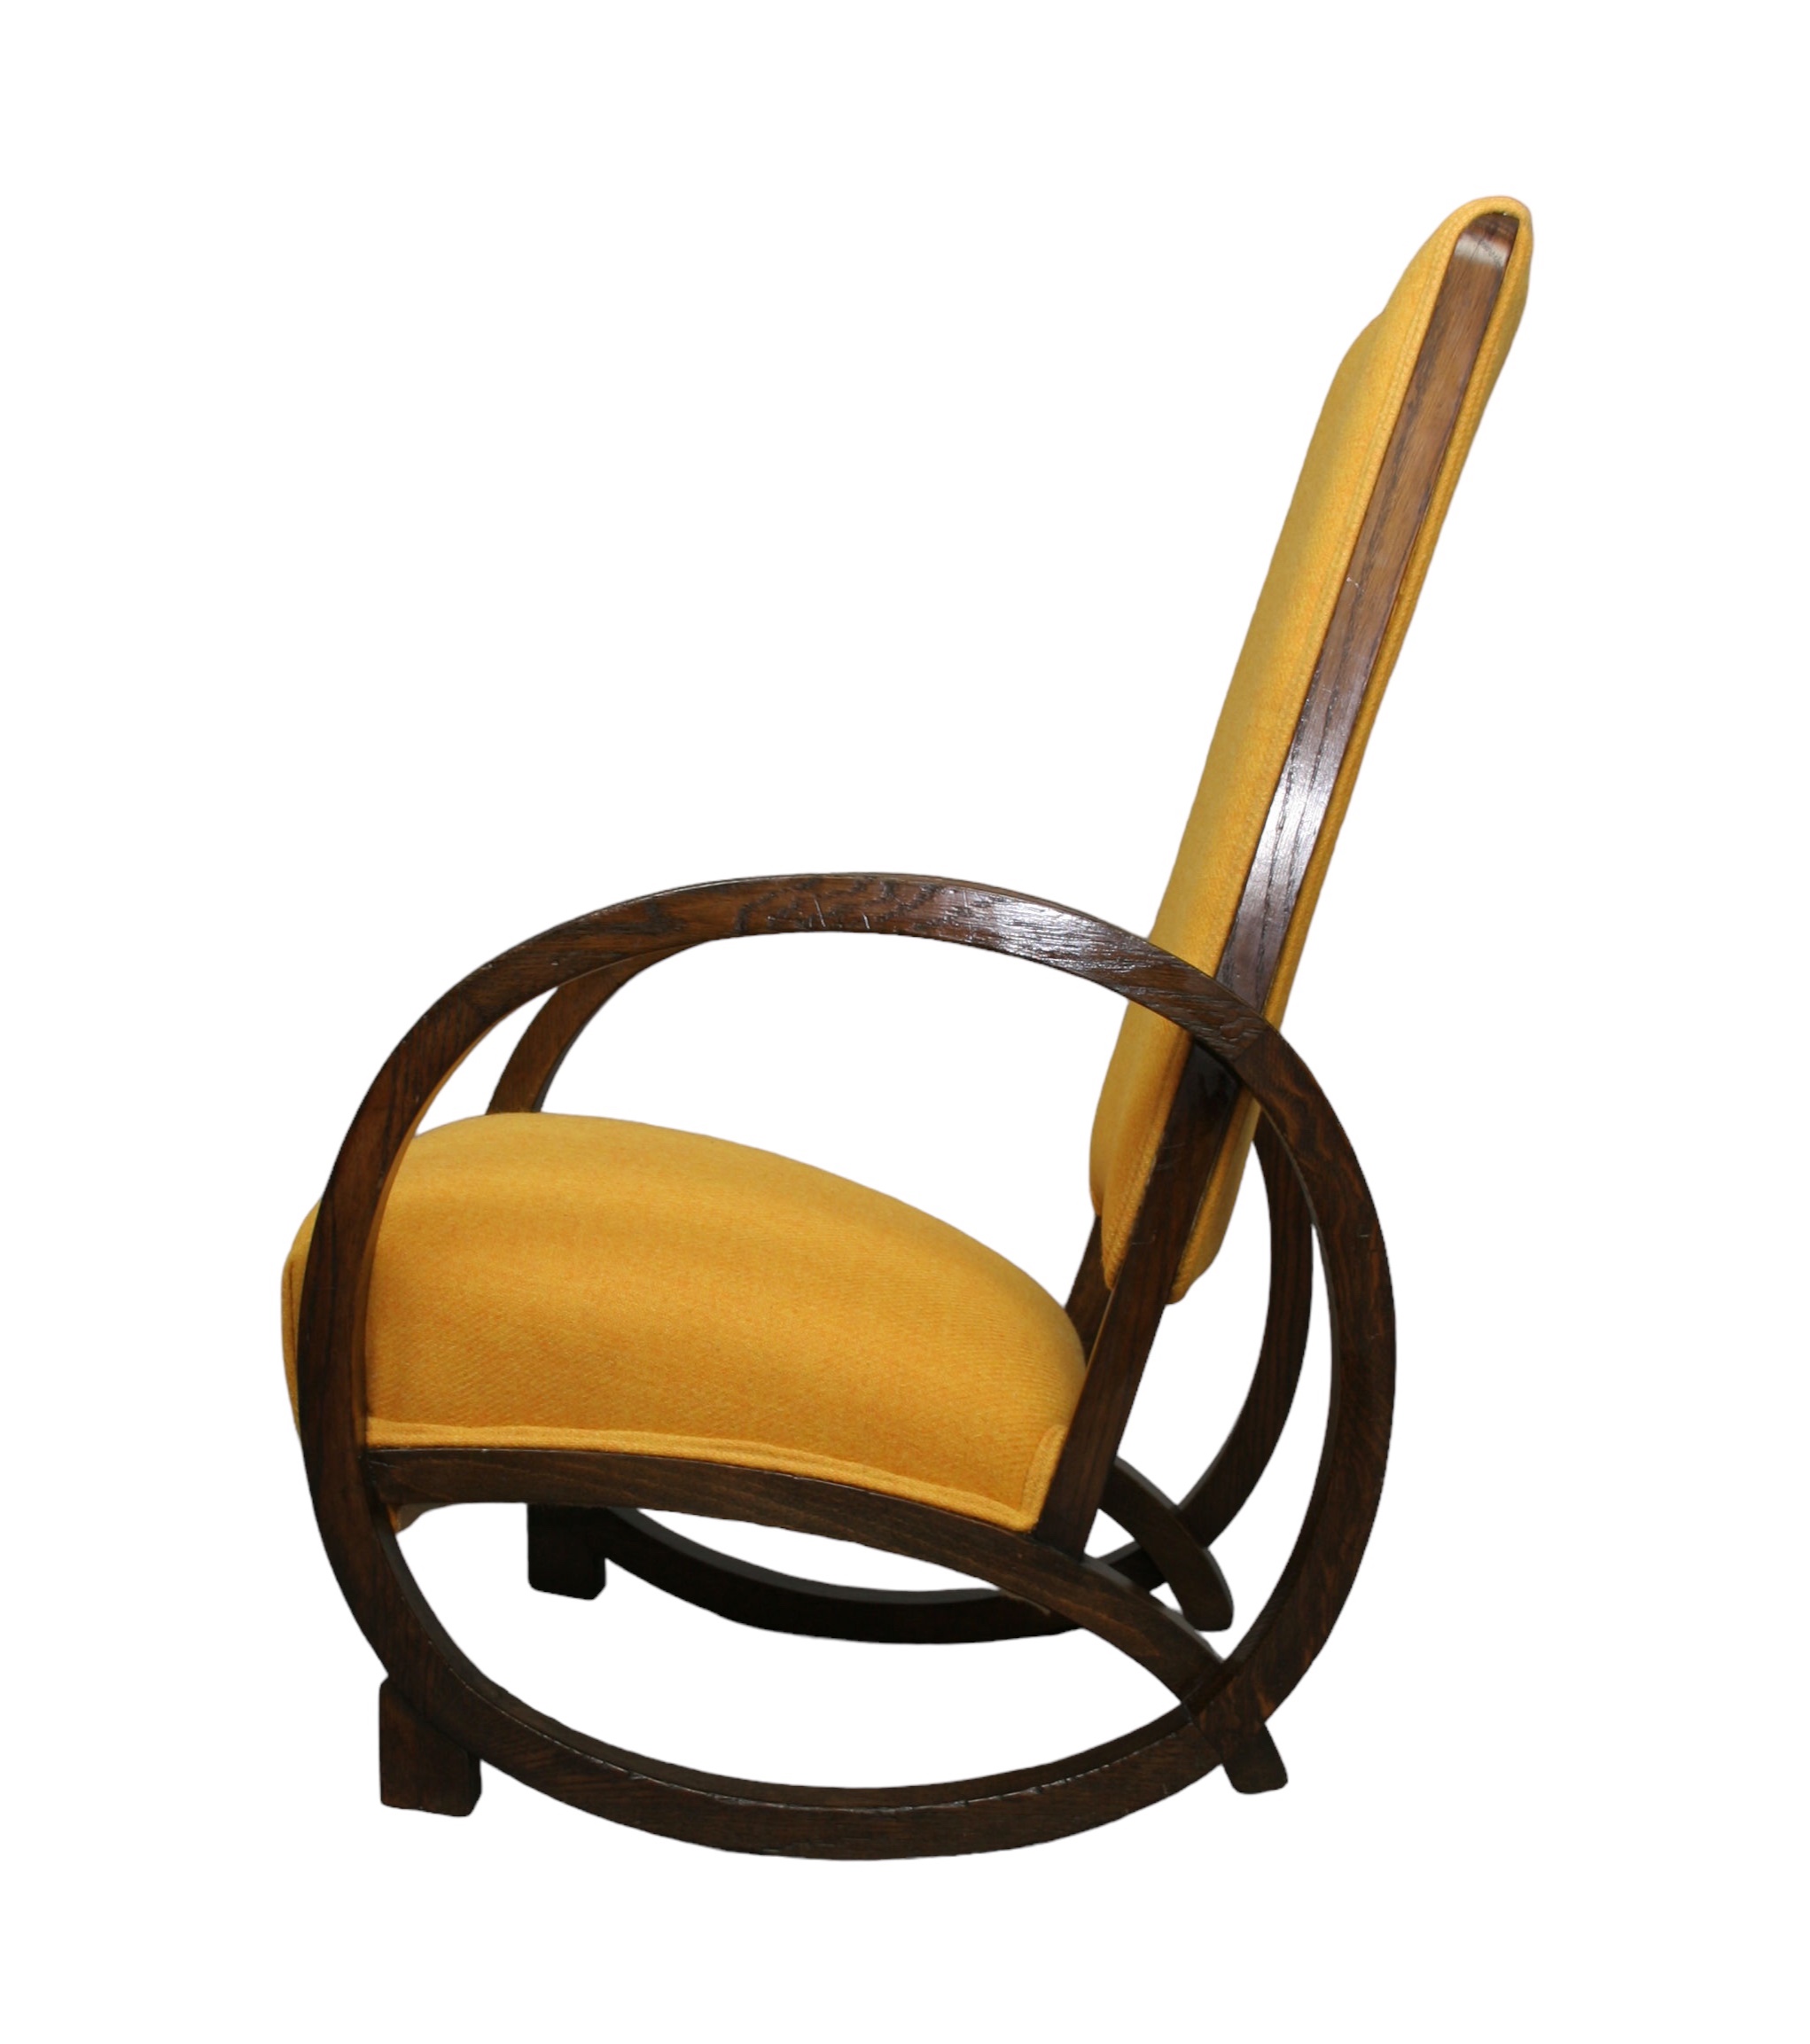 Art Deco 1930s Rocking Chair By Heals Of London Fully Restored And Upholstered In Yellow Harris Tweed